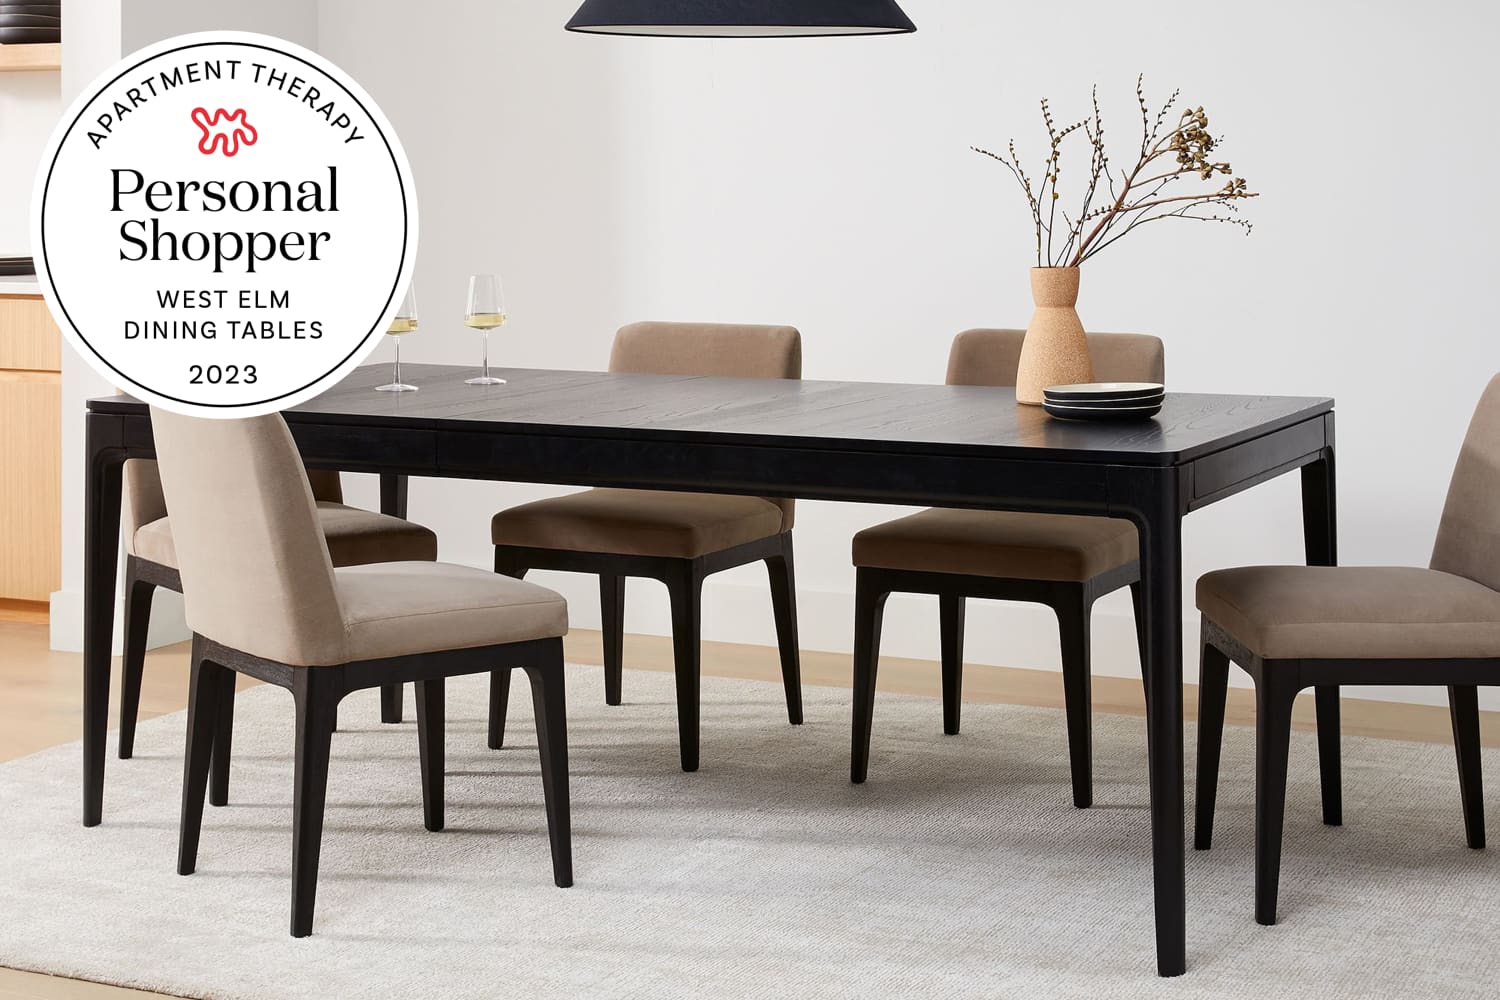 Personal Shopper West Elm Dining Tables Lead